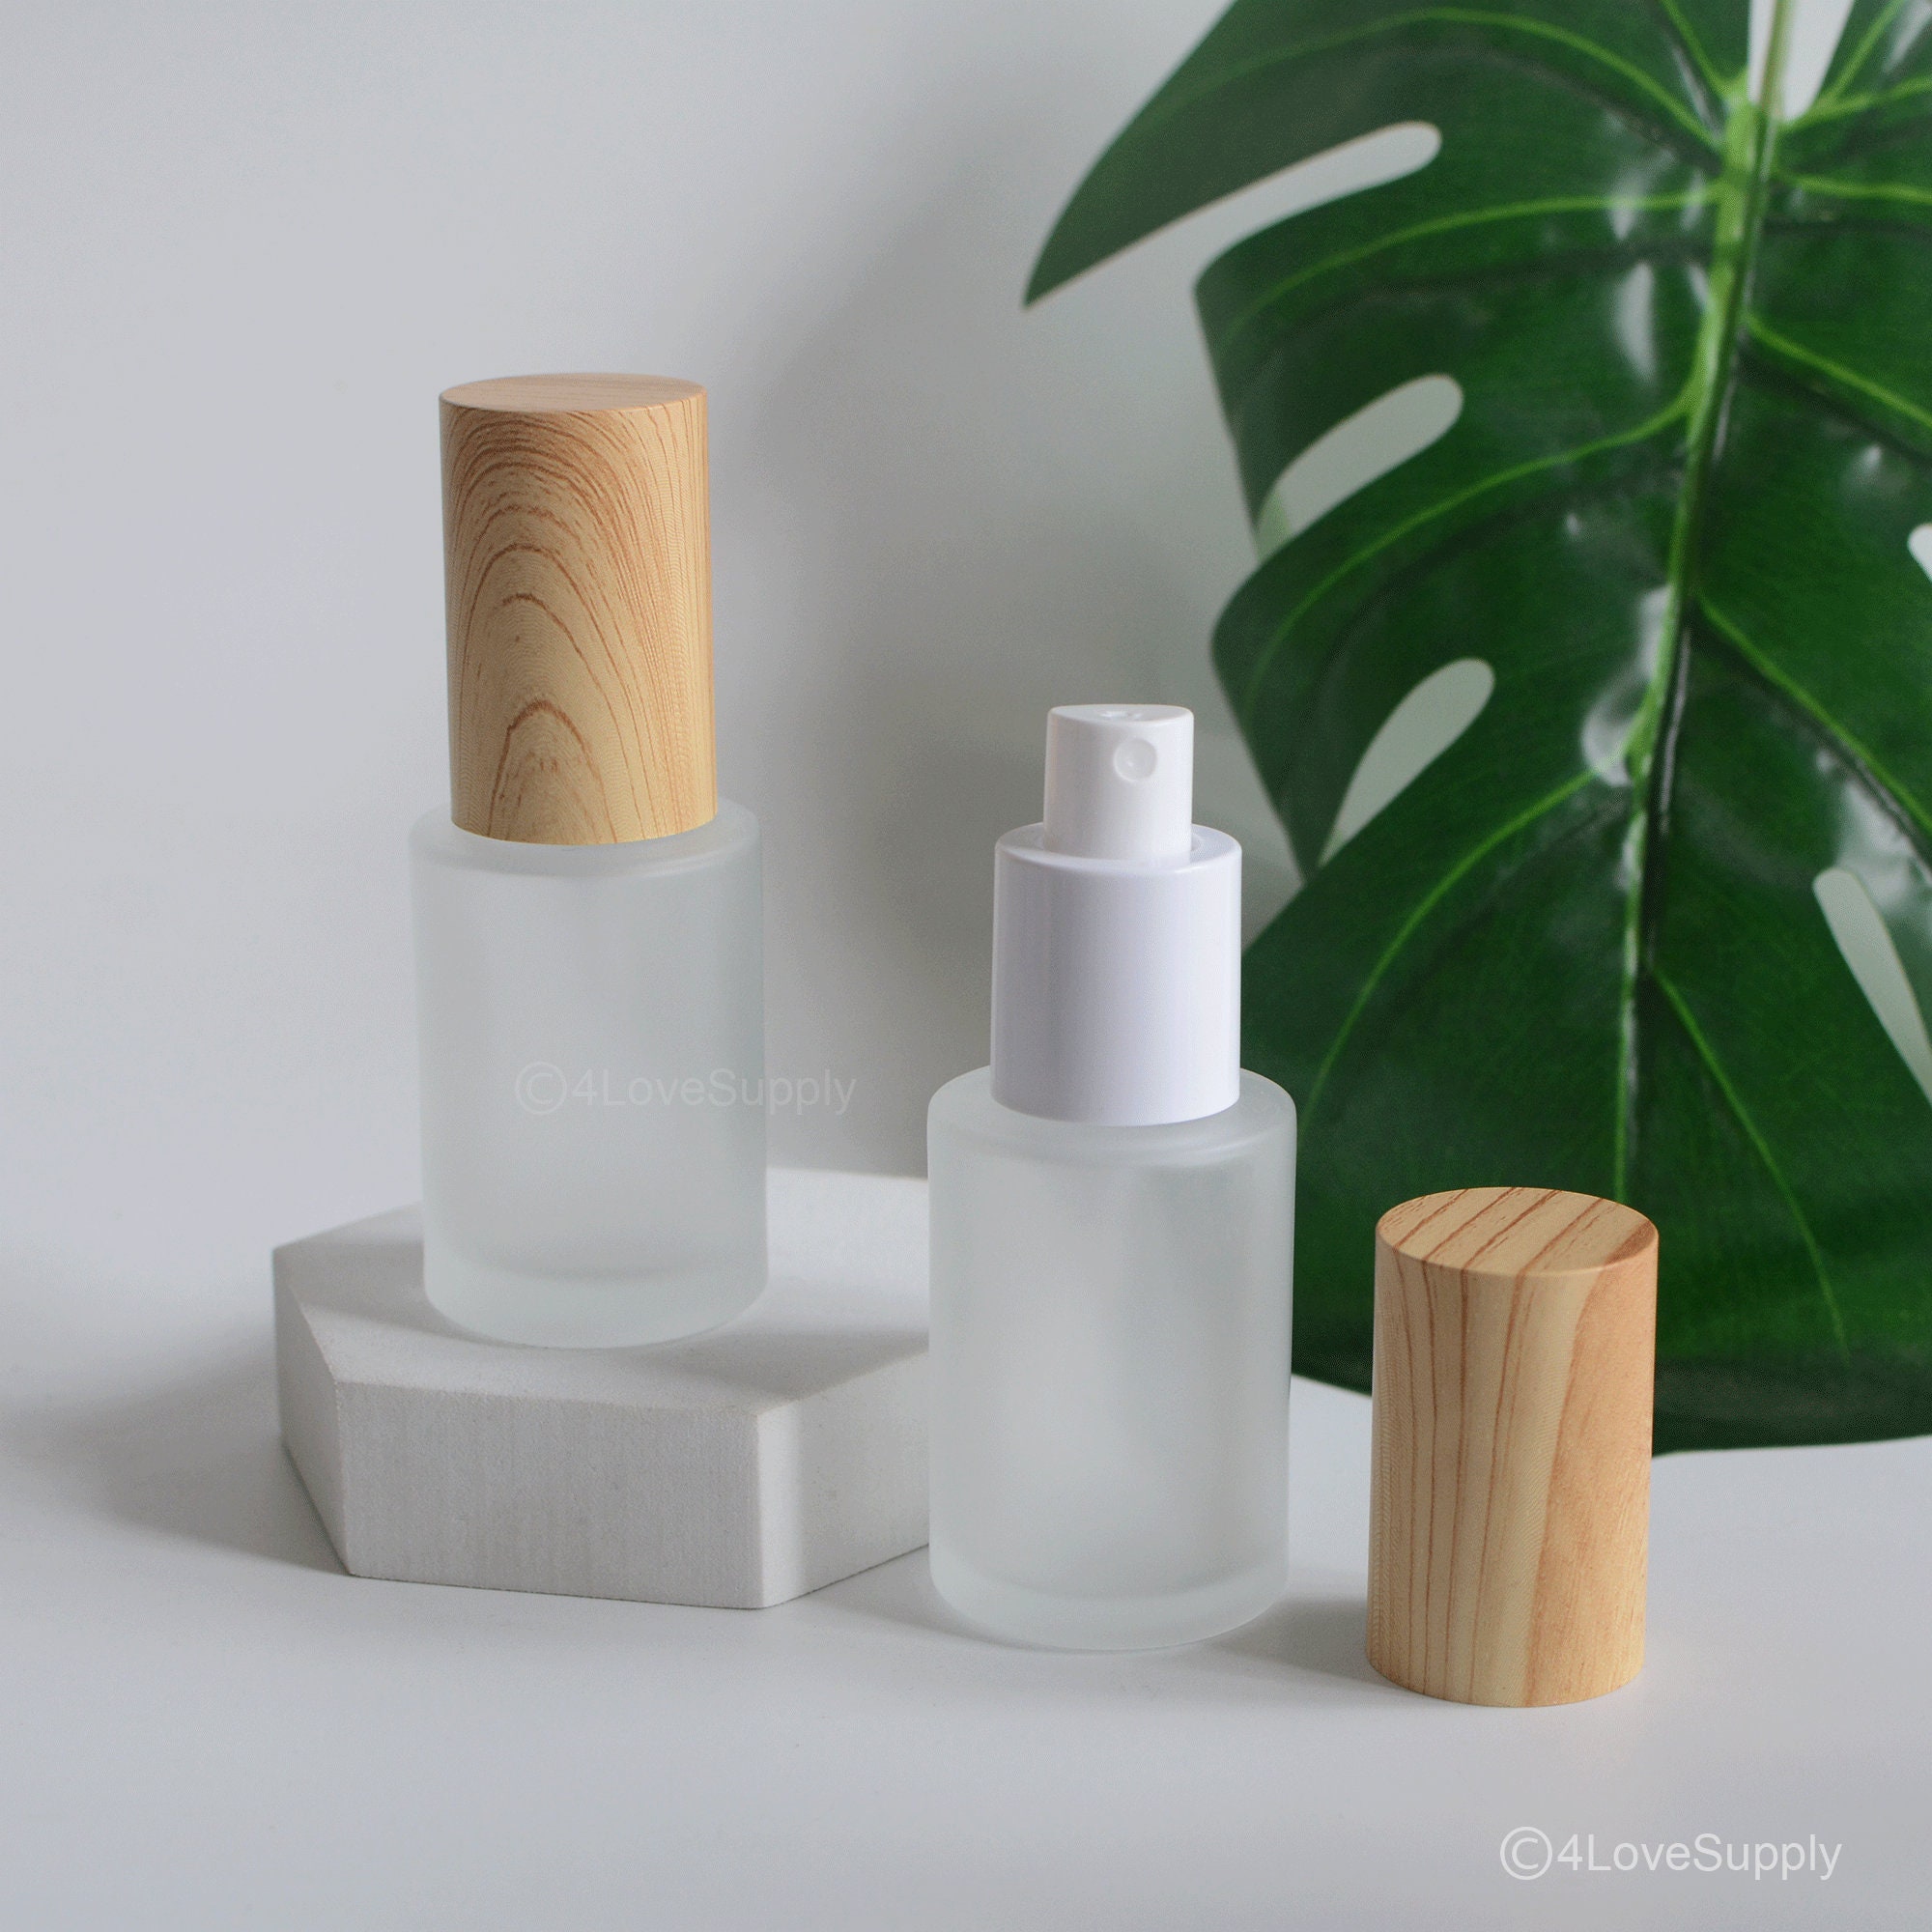 30ml-120ml Bamboo Wooden Printing Look Frosted Glass Spray